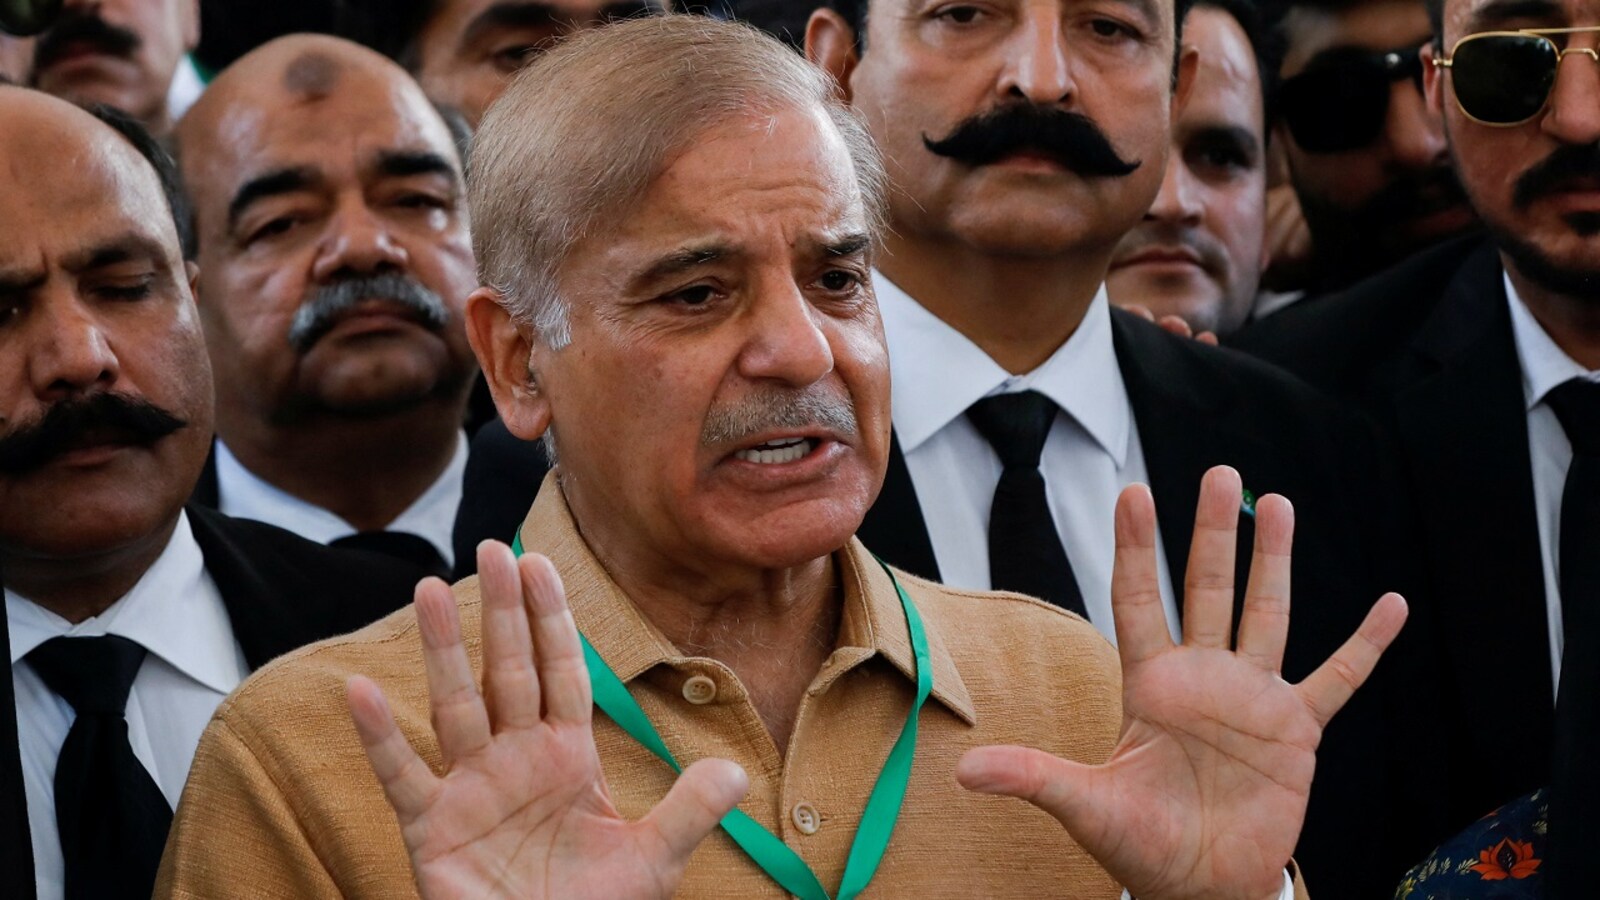 Pakistan elections to be held according to digital census conducted earlier  this year: PM Shehbaz Sharif